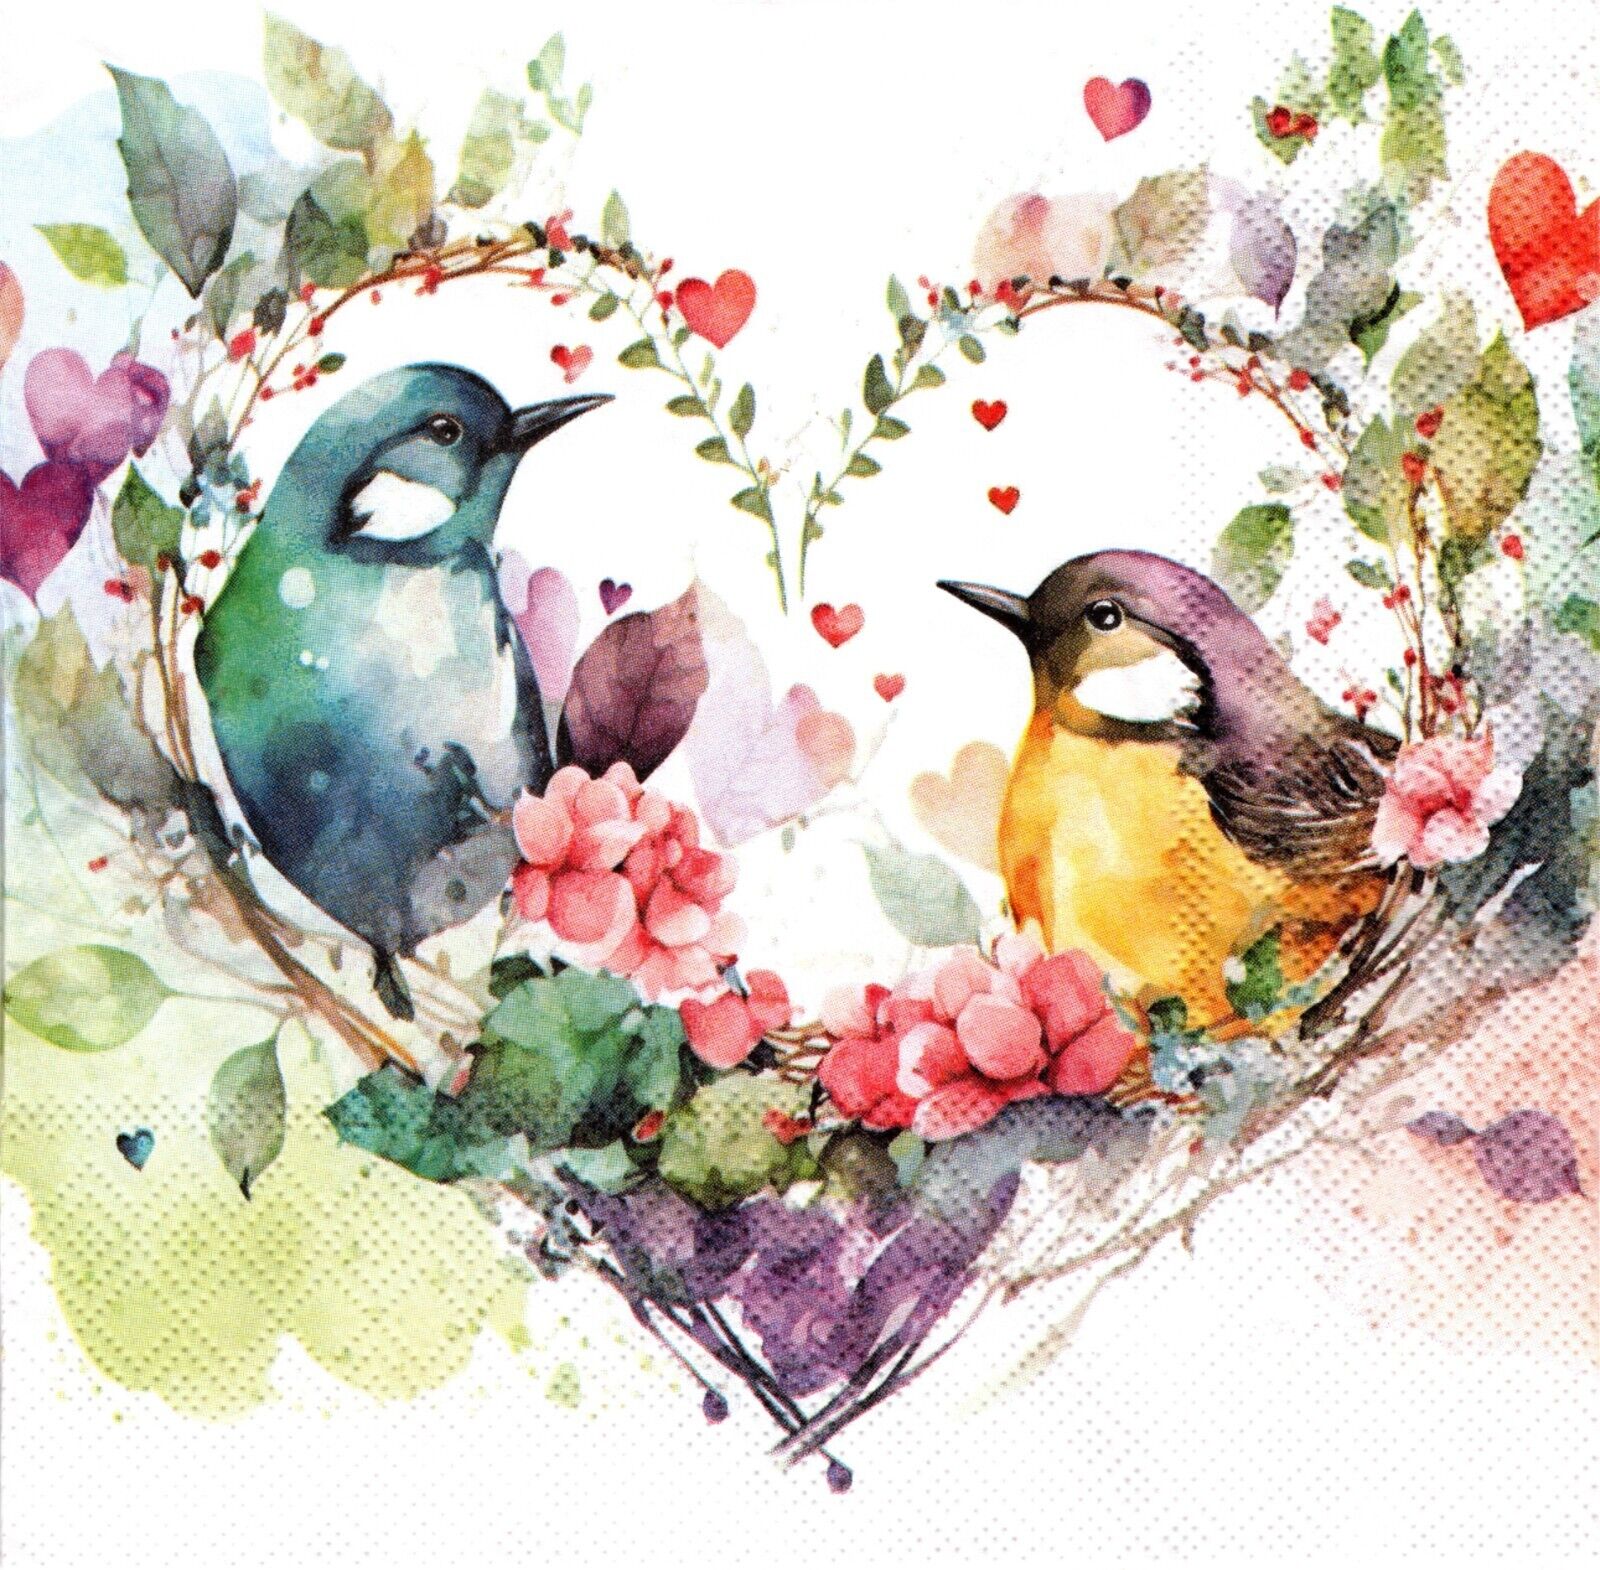 (2) Two Paper Lunch Napkins for Decoupage/Mixed Media - Loving Birds in Heart